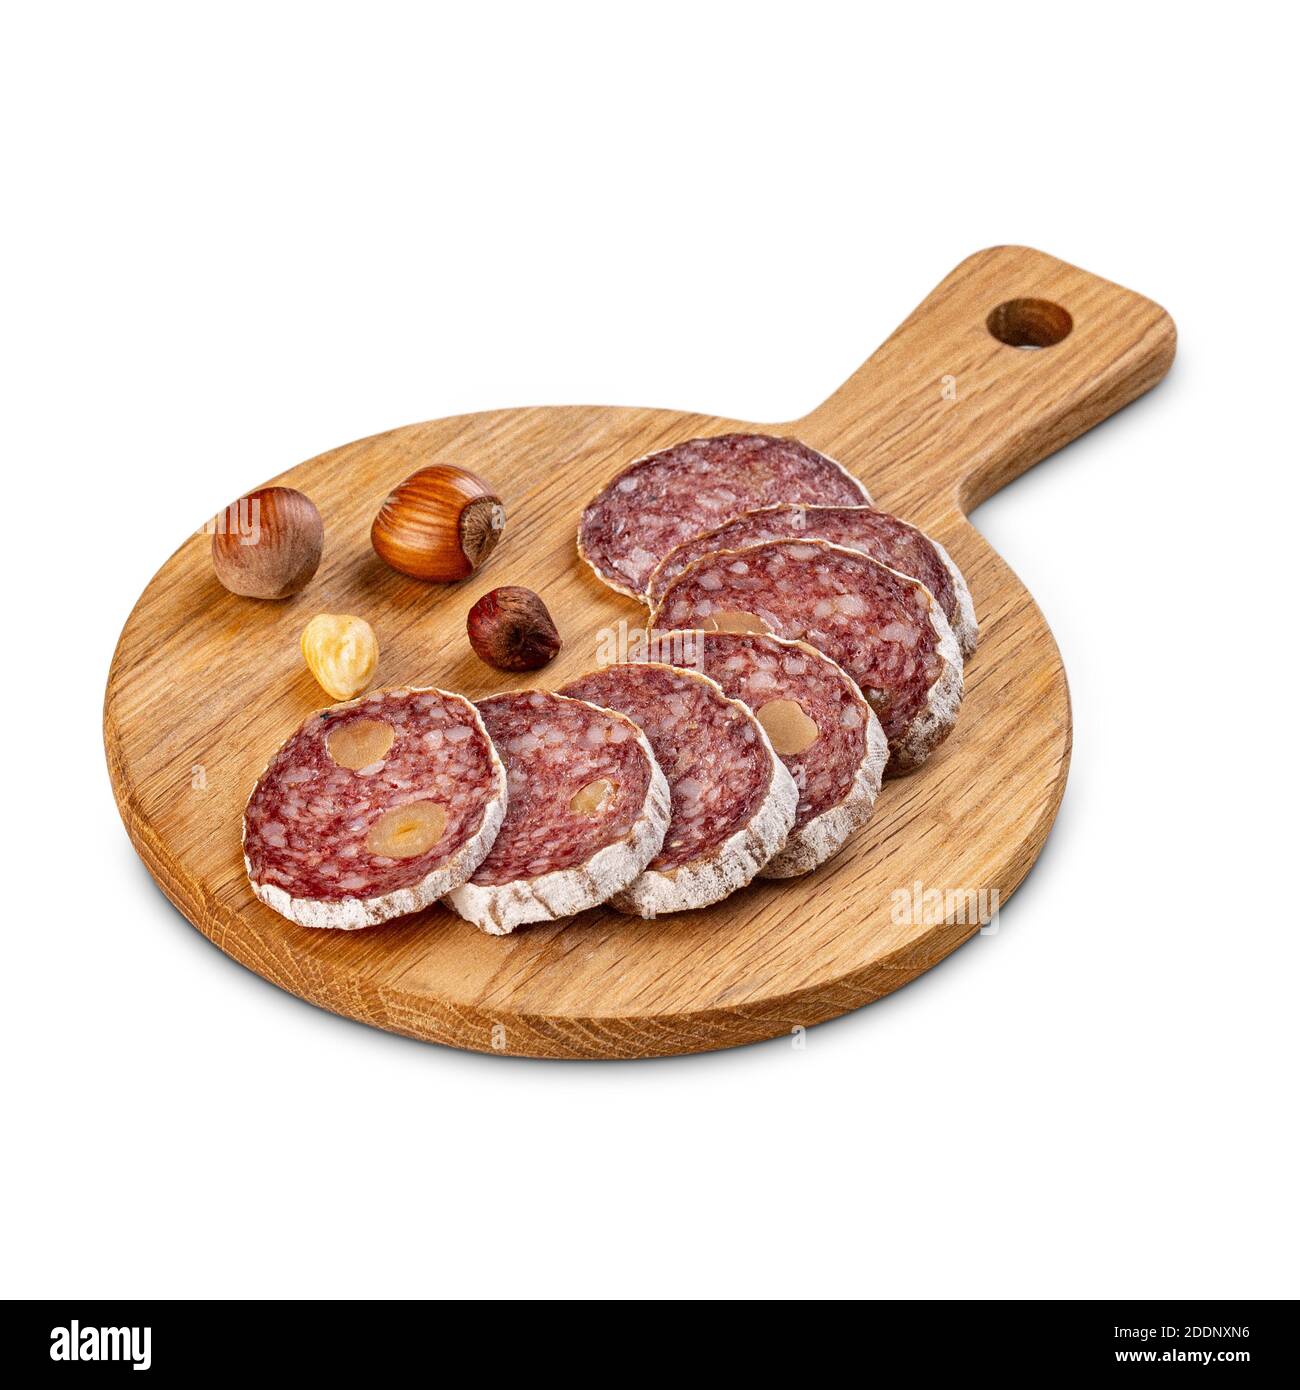 Gourmet salami with noble mold crust. Sliced sausage salami with filbert on wooden cutting board Stock Photo